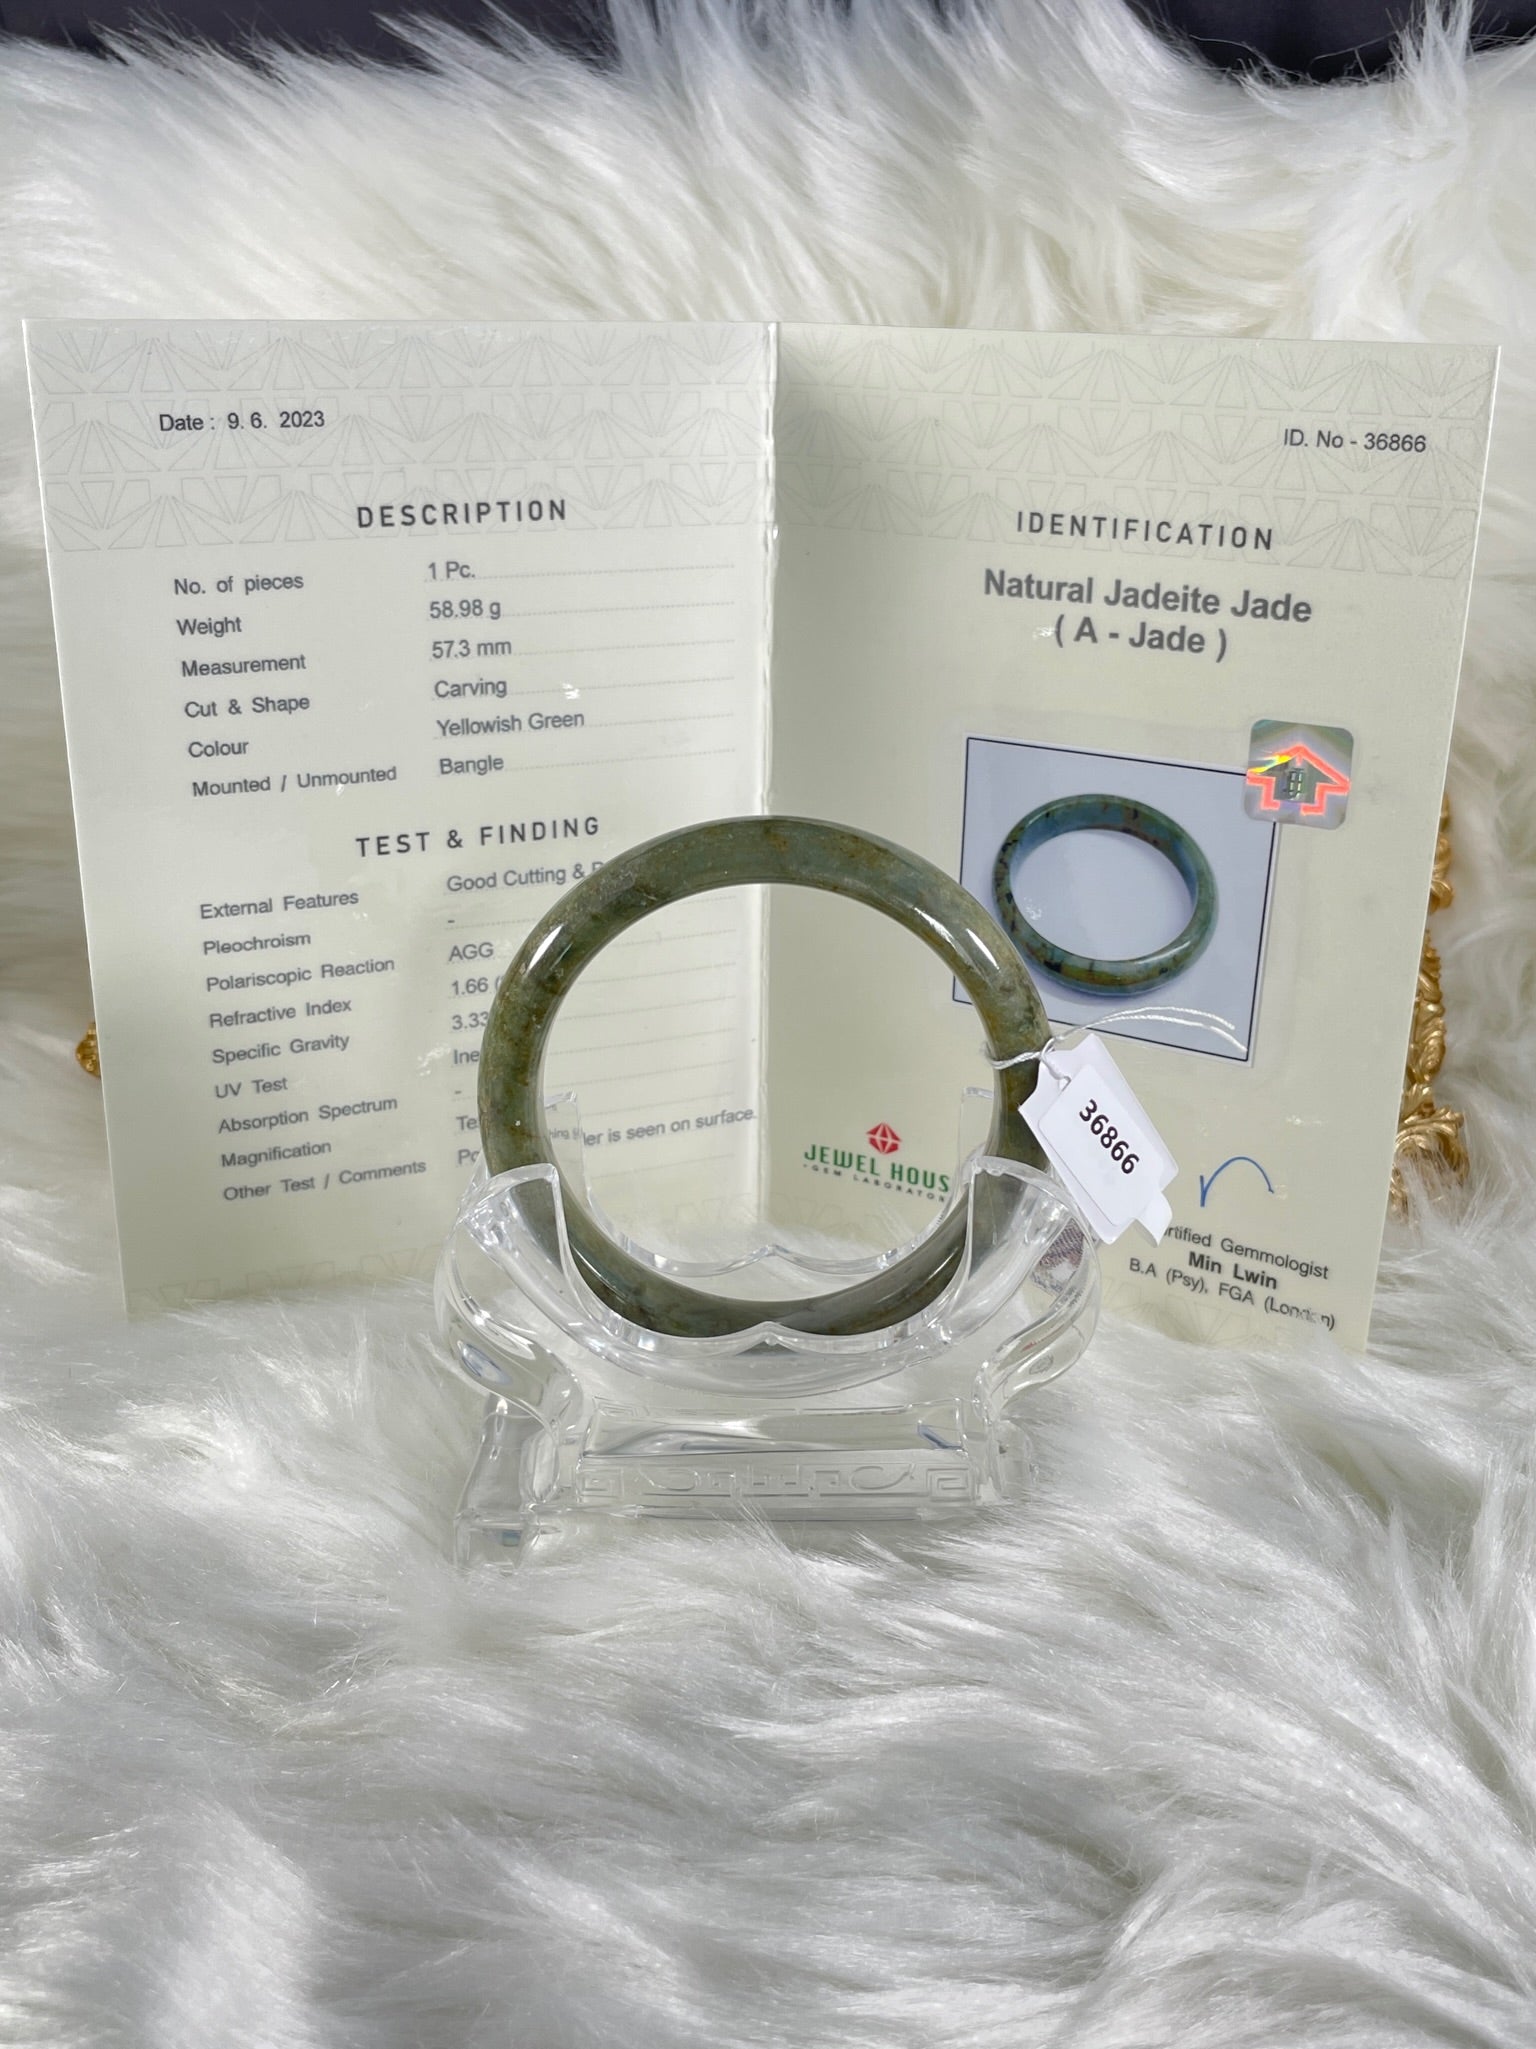 Grade A Natural Jade Bangle with certificate #36866